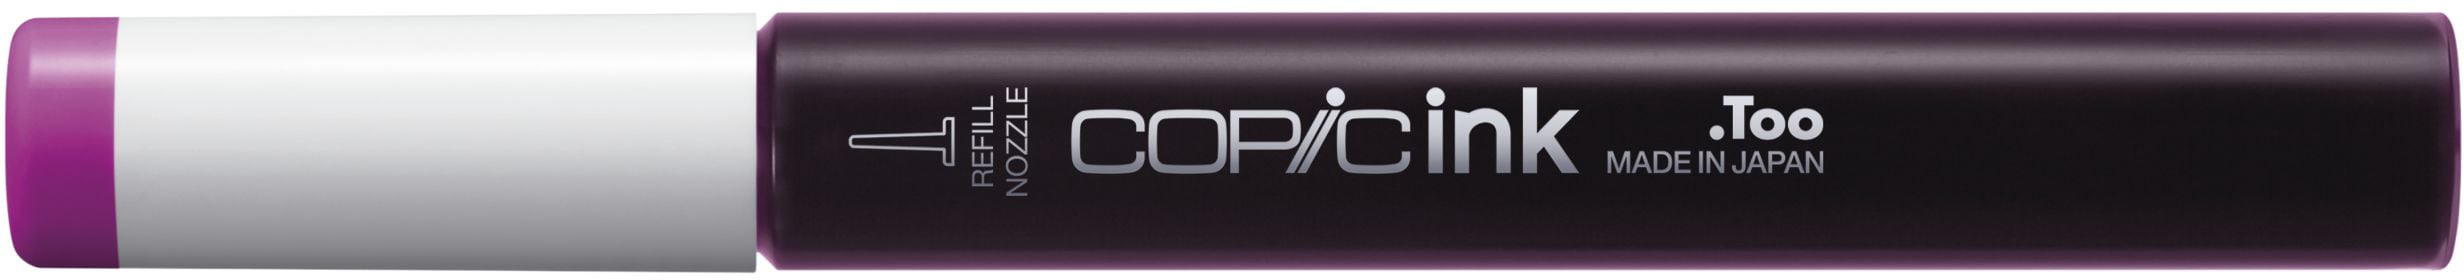 COPIC Ink Refill 2107639 RV19 - Red Violet